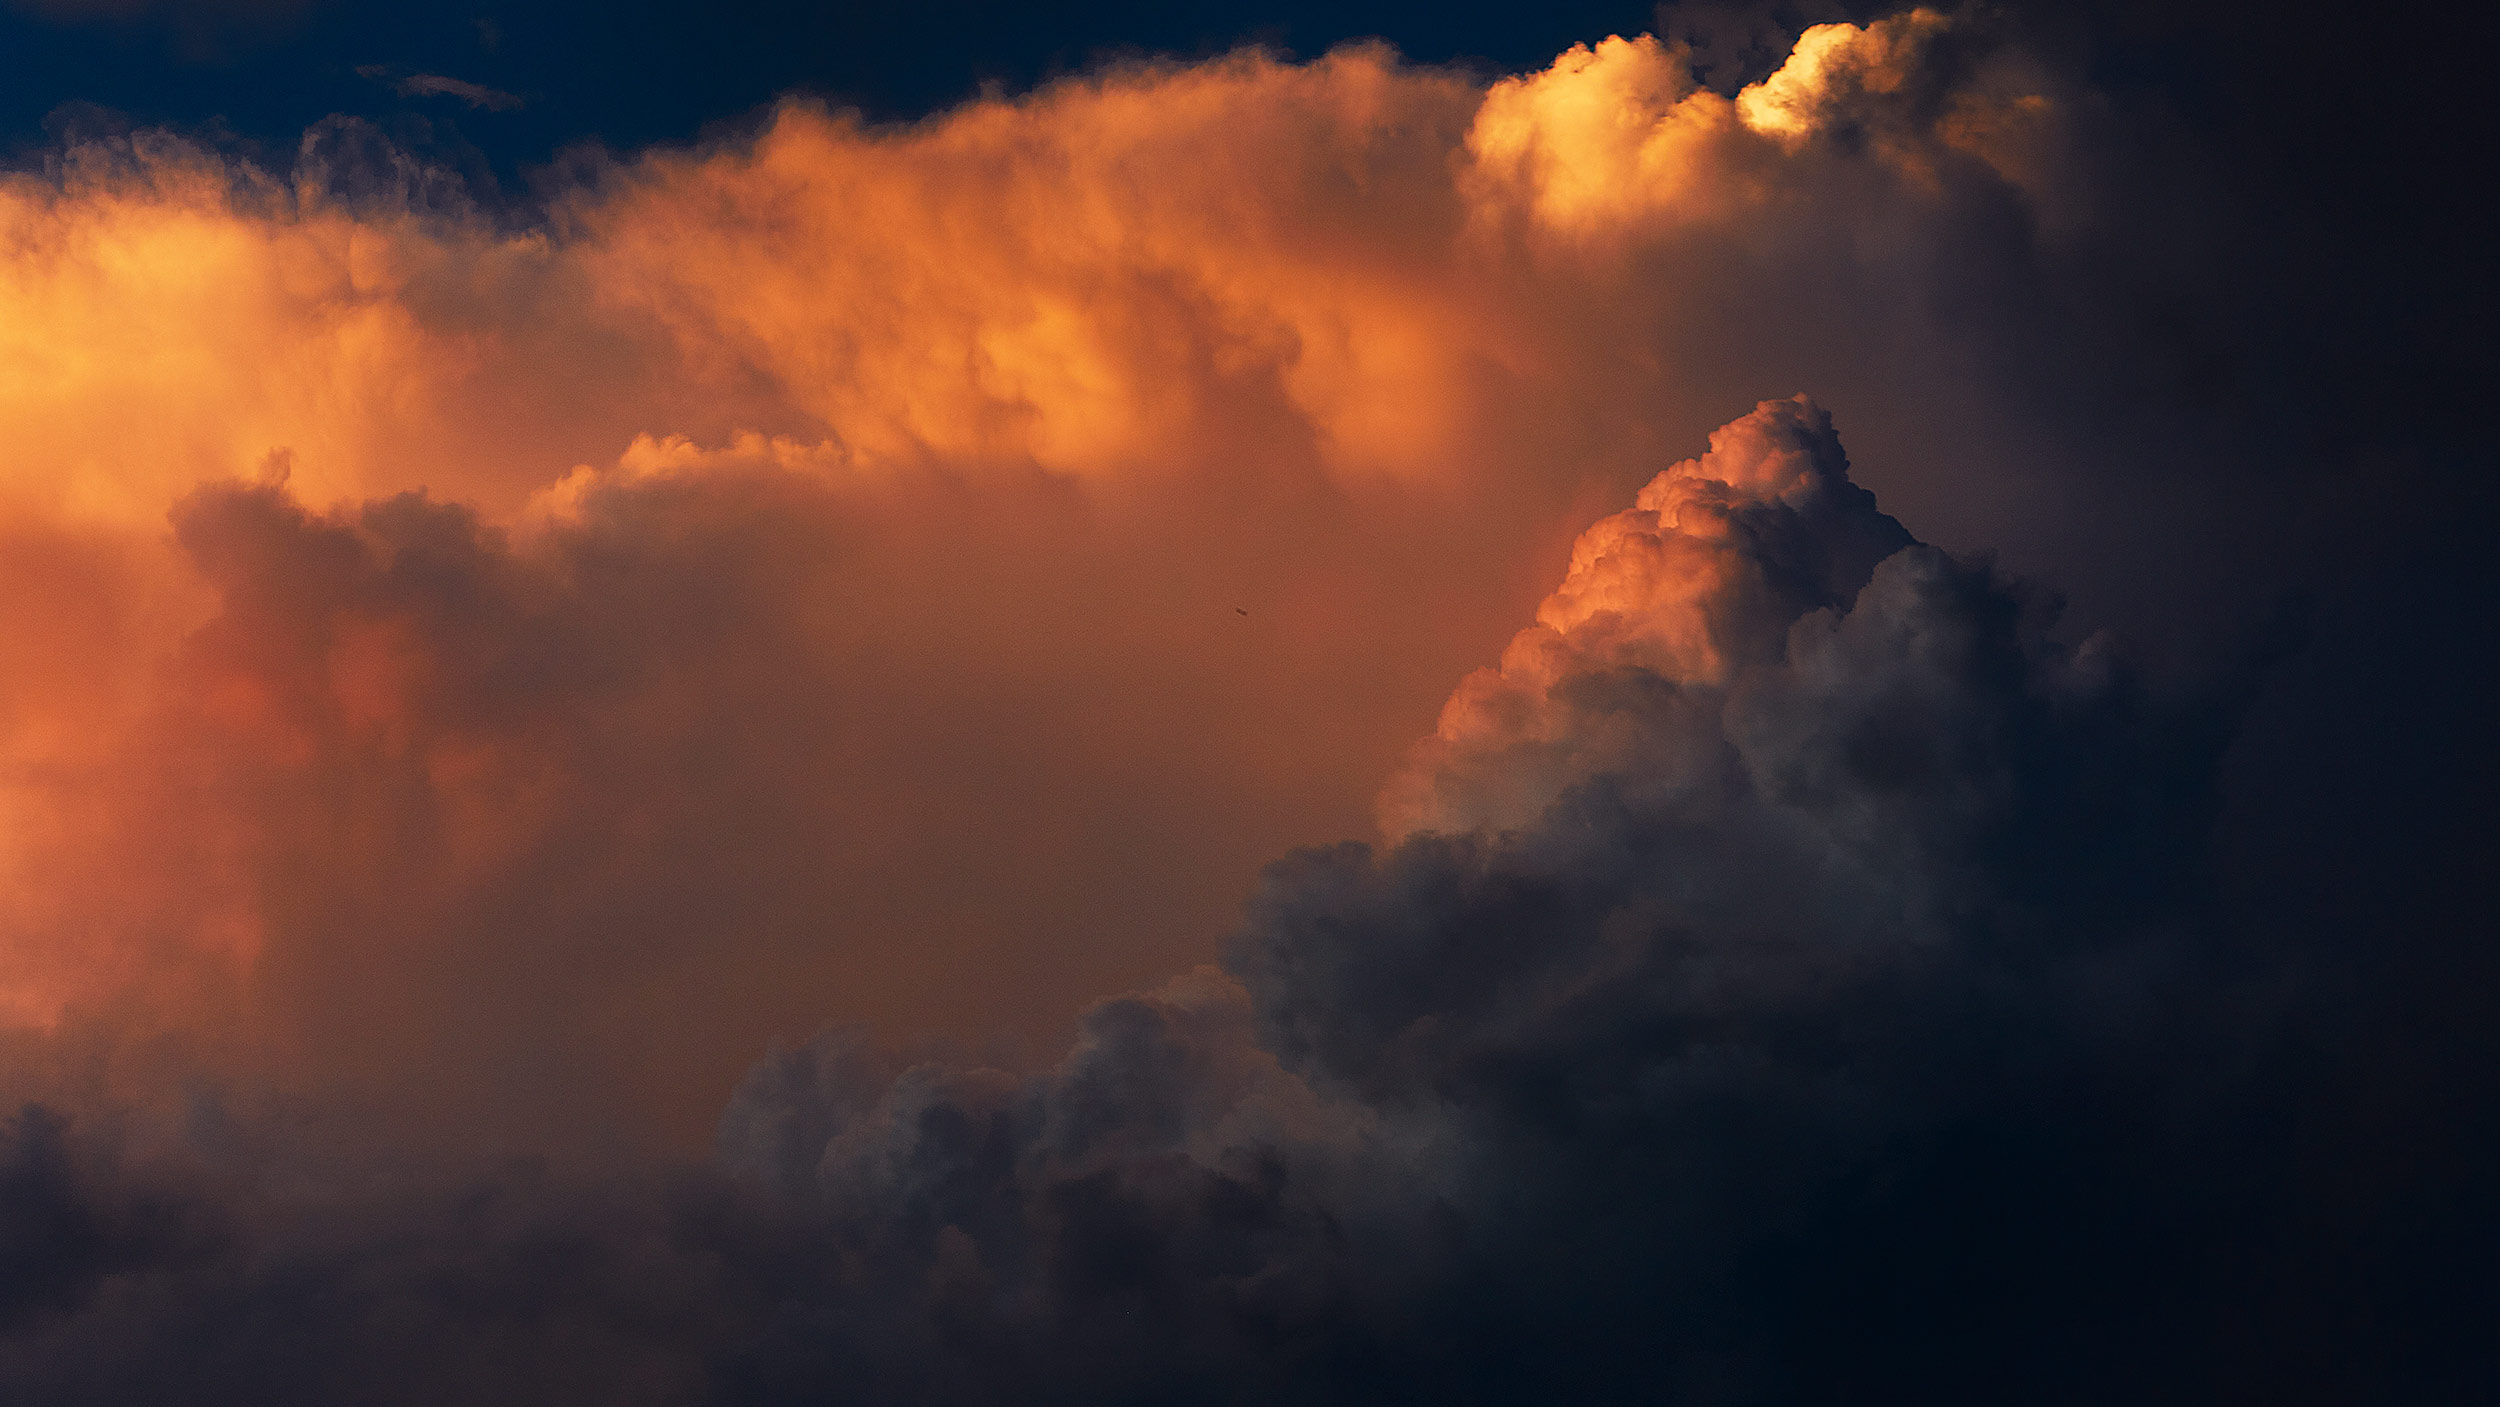 Storm Clouds At Sunset